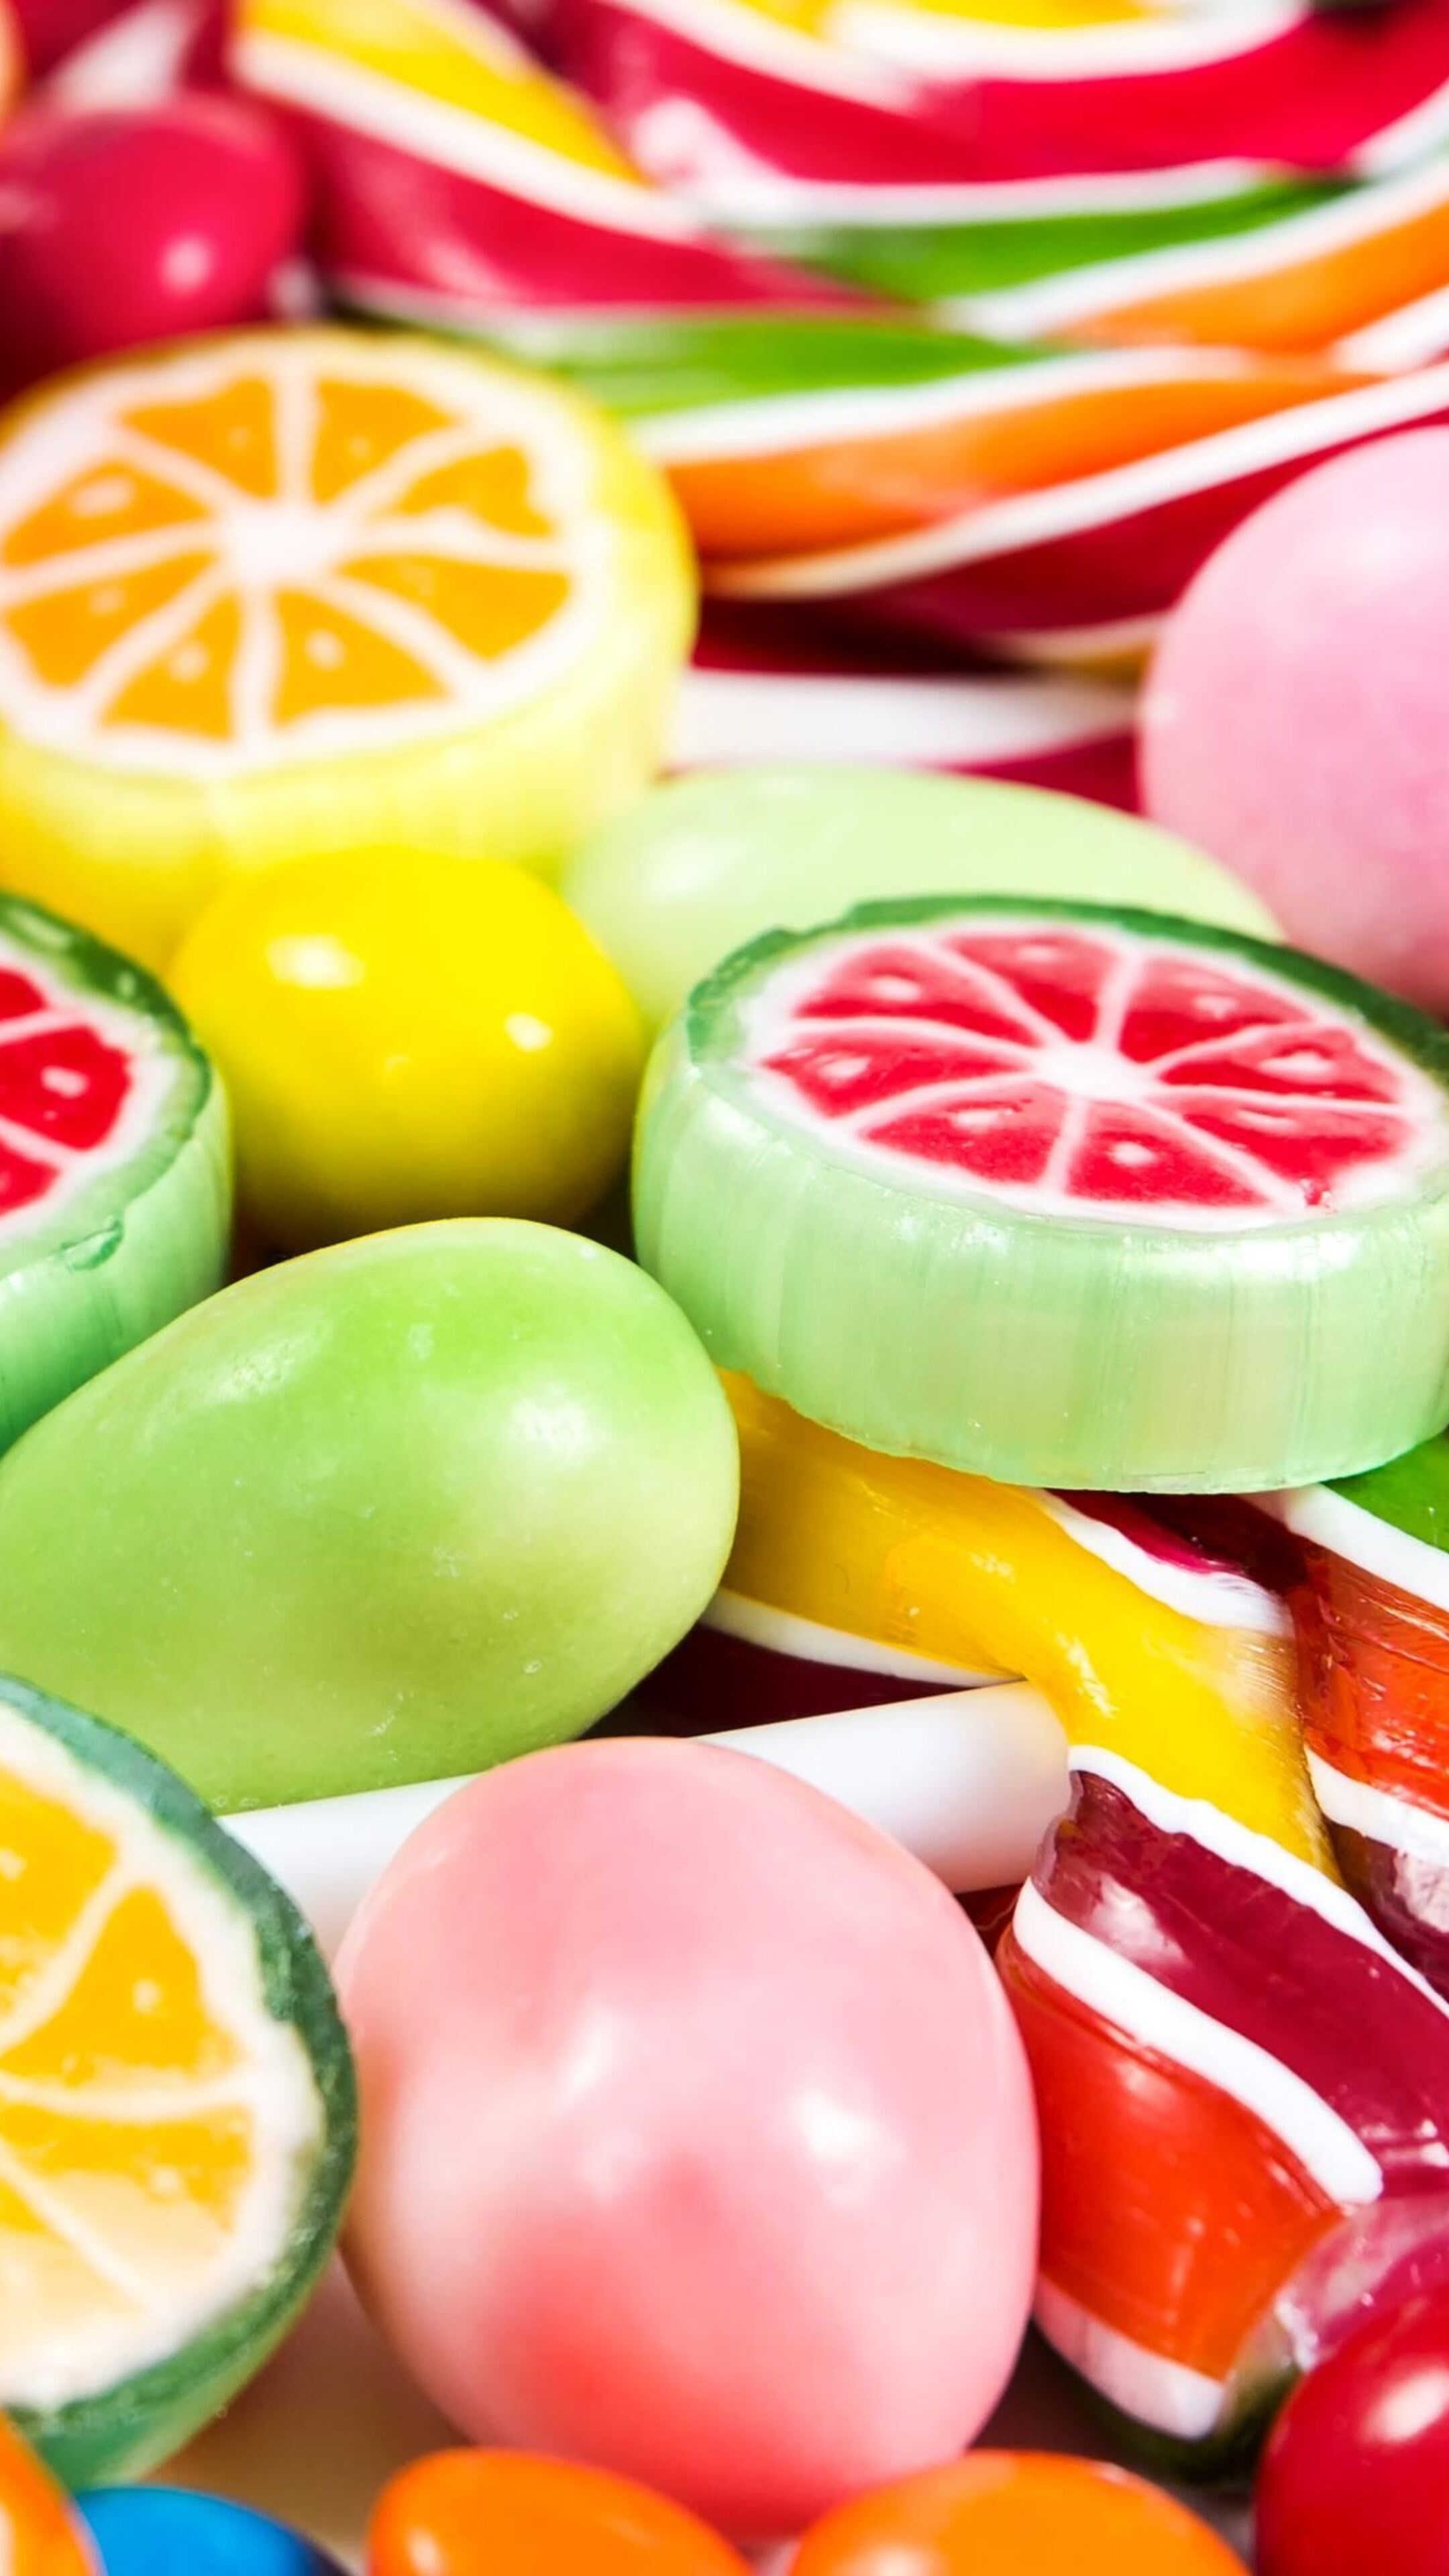 Colorful candy Xperia wallpapers, Stunning HD and 4K images, Eye-catching candy visuals, Vibrant confectionery, 2160x3840 4K Phone